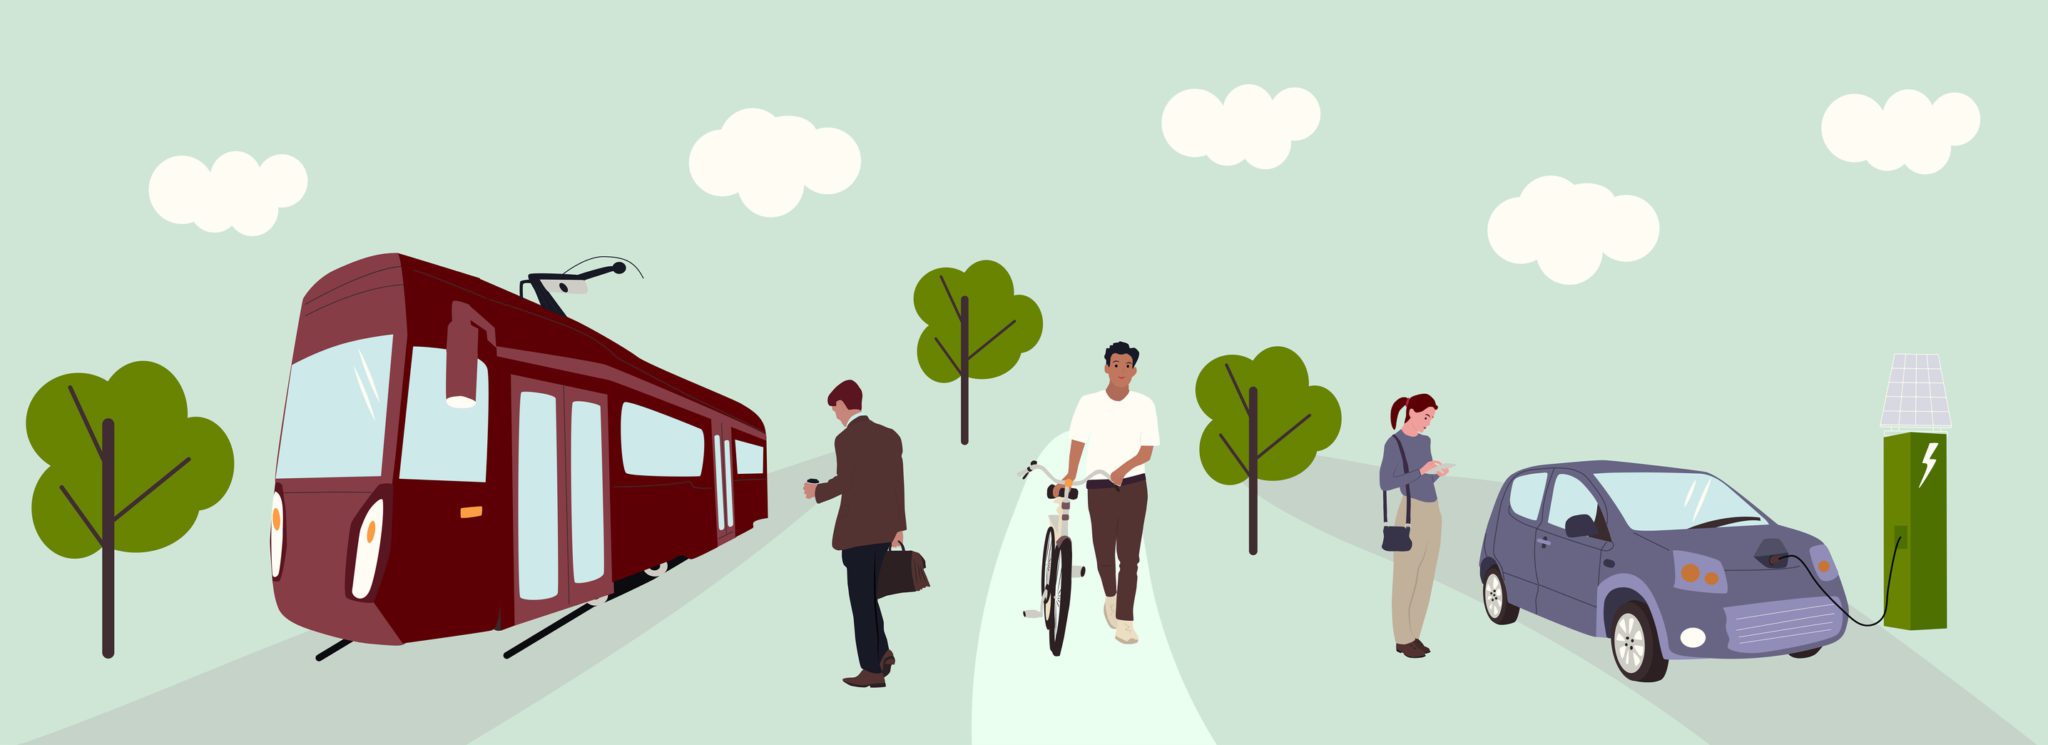 Eco transport and people concept. Man going to tram, woman charging electro car, guy with bicycle.